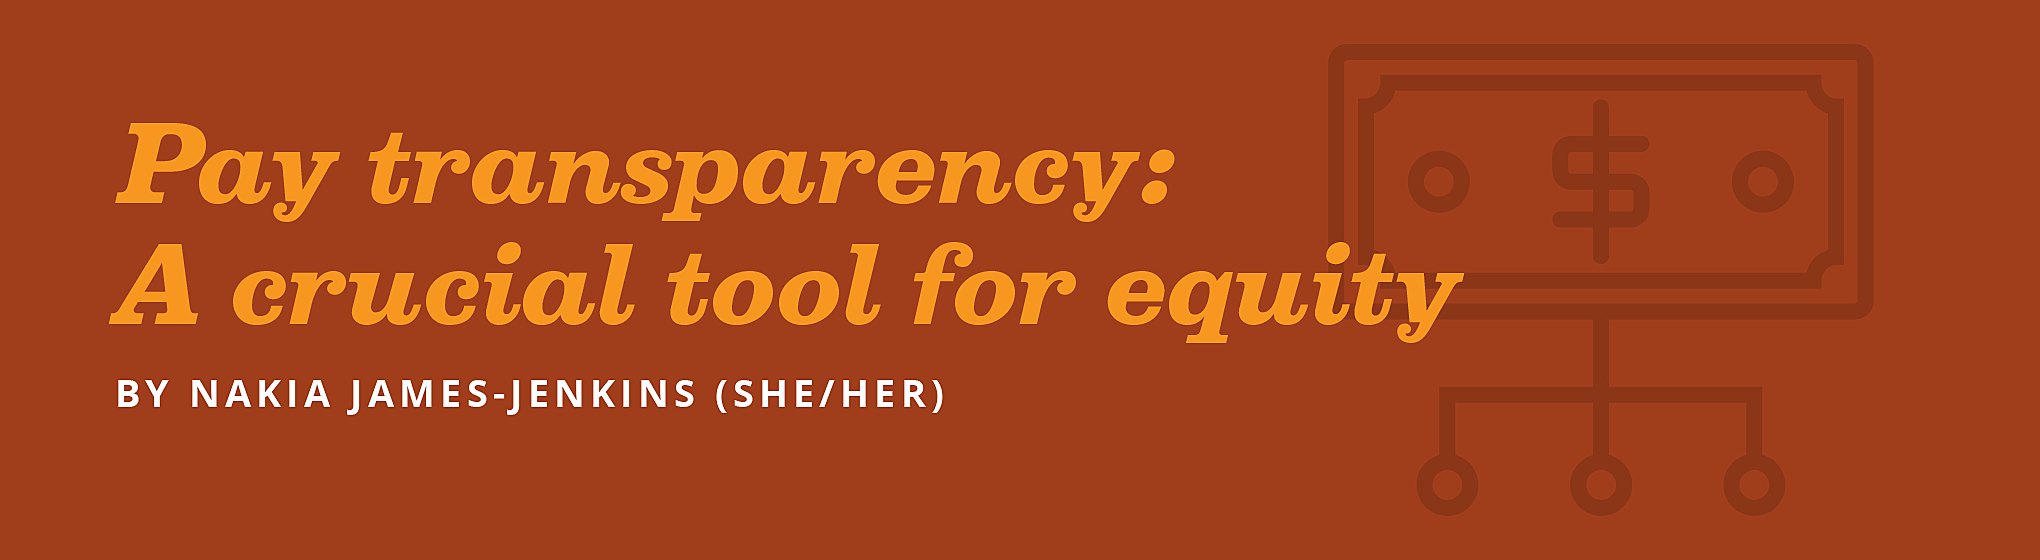 Author's name with the "Pay transparency: A crucial tool for equity" caption